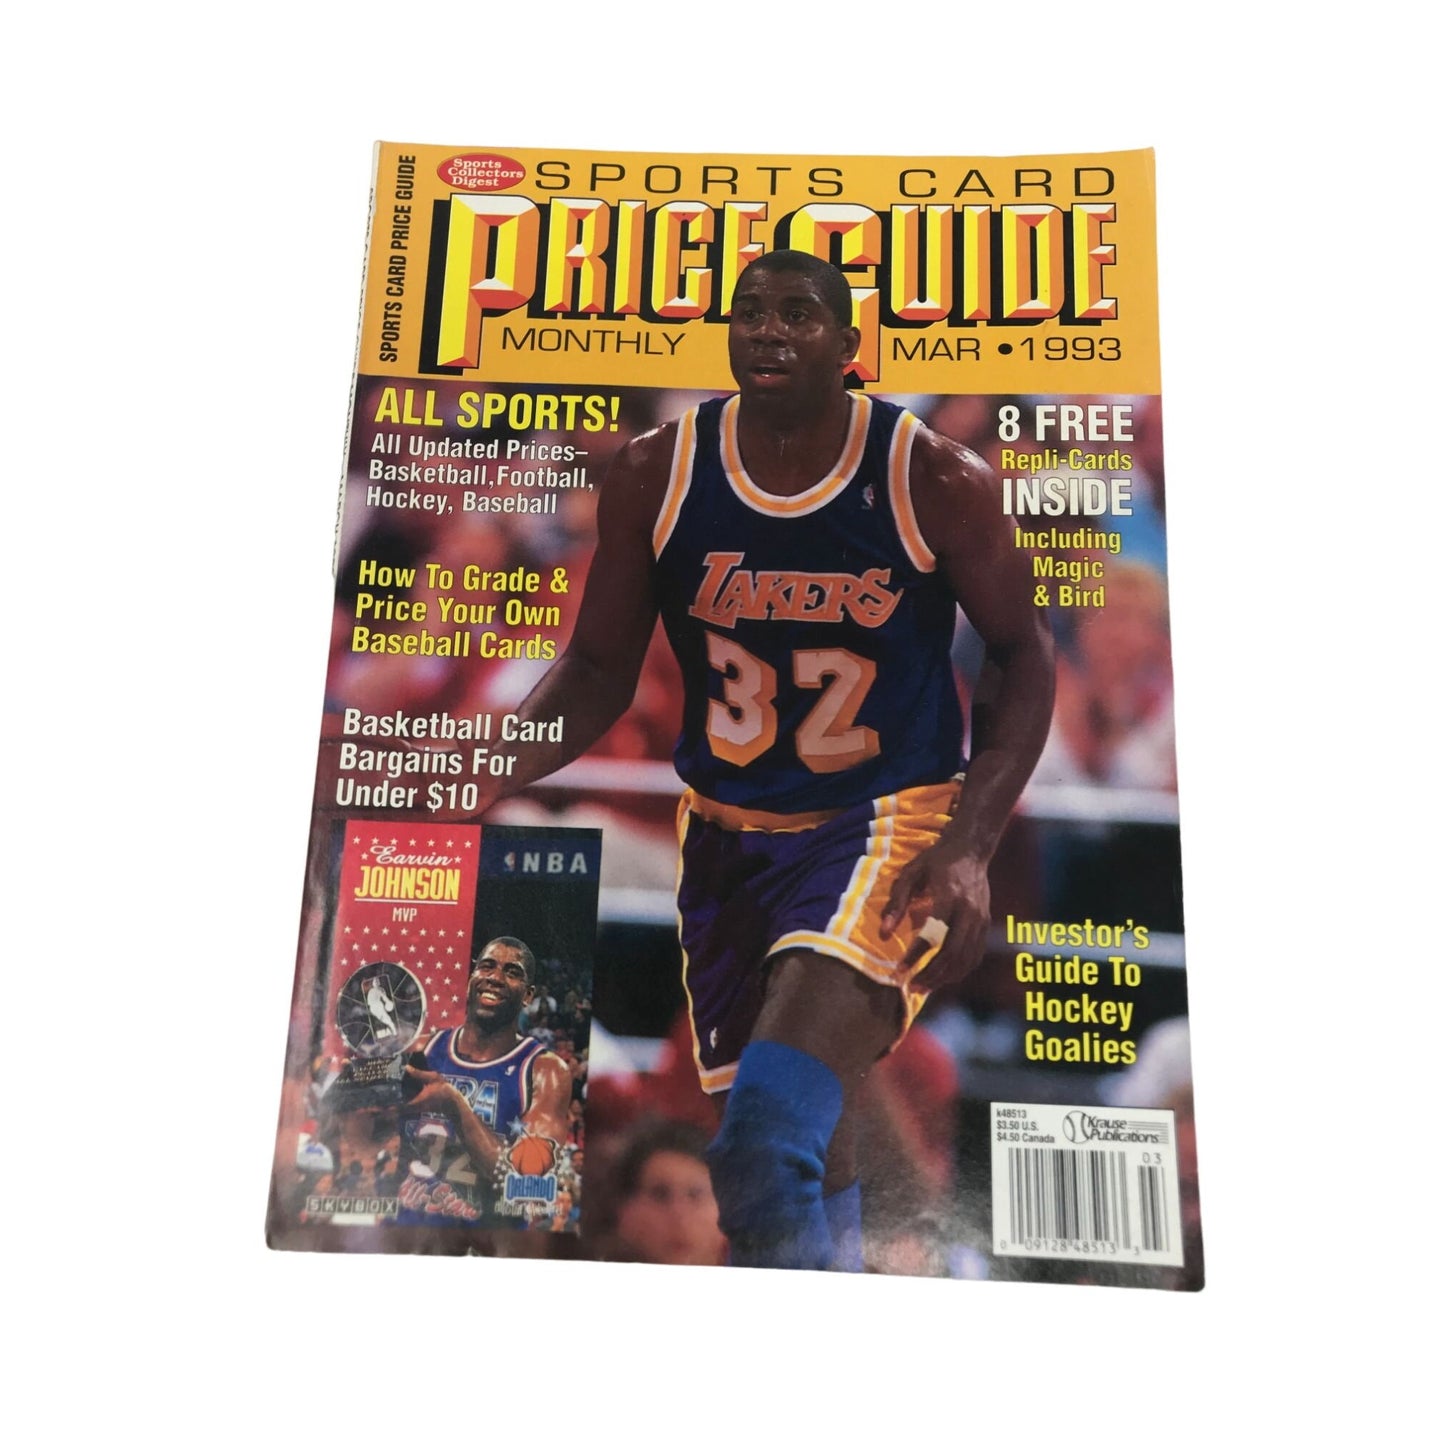 Sports Card Price Guide Monthly #60 March 1993 Earvin Johnson MVP Cover